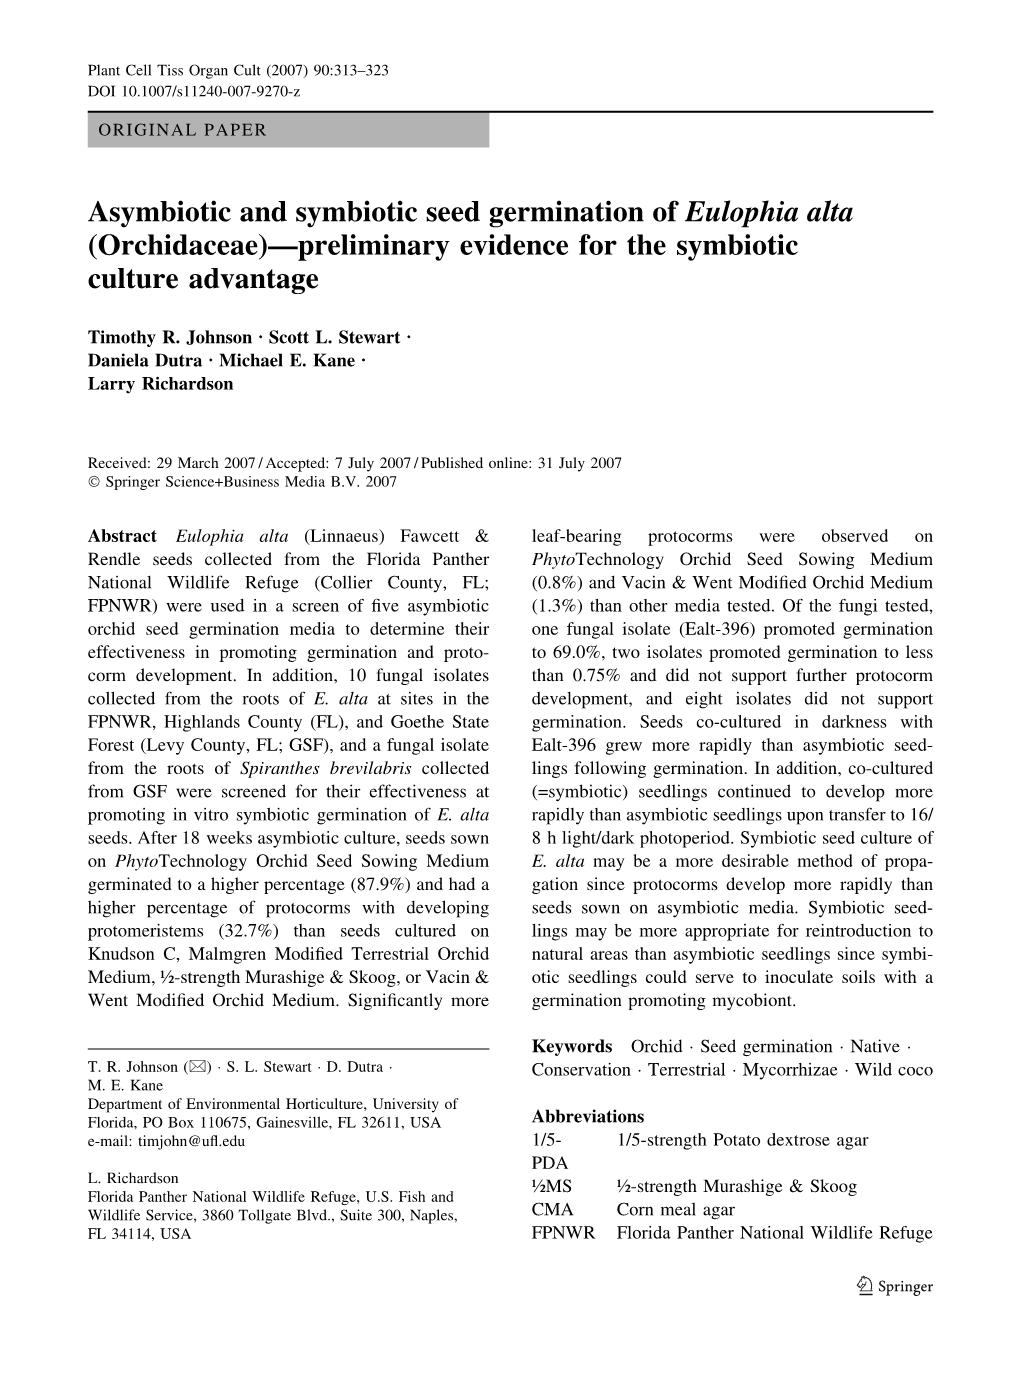 Asymbiotic and Symbiotic Seed Germination for Eulophia Alta